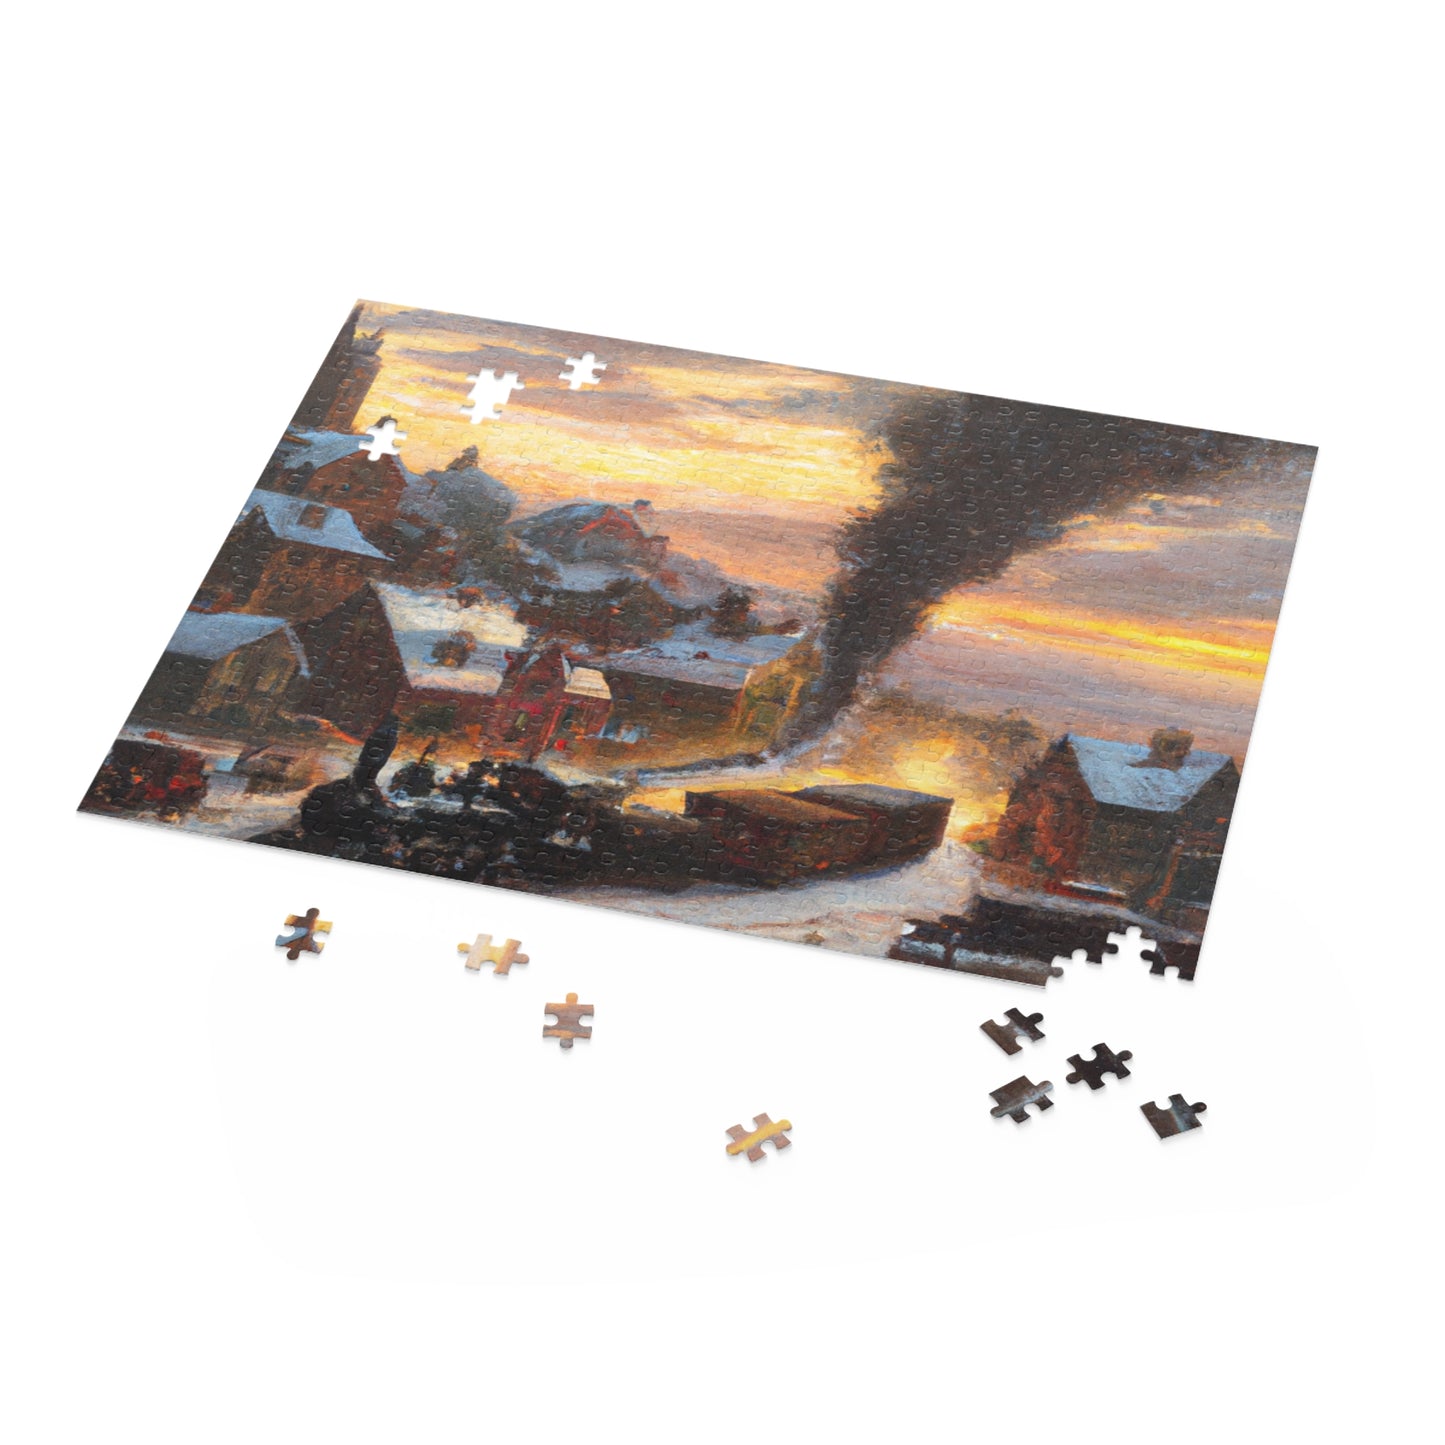 Vintage Christmas Village - JigSaw Puzzle 500 Piece: William Winterscale - Christmas Gift | Holiday Scenes